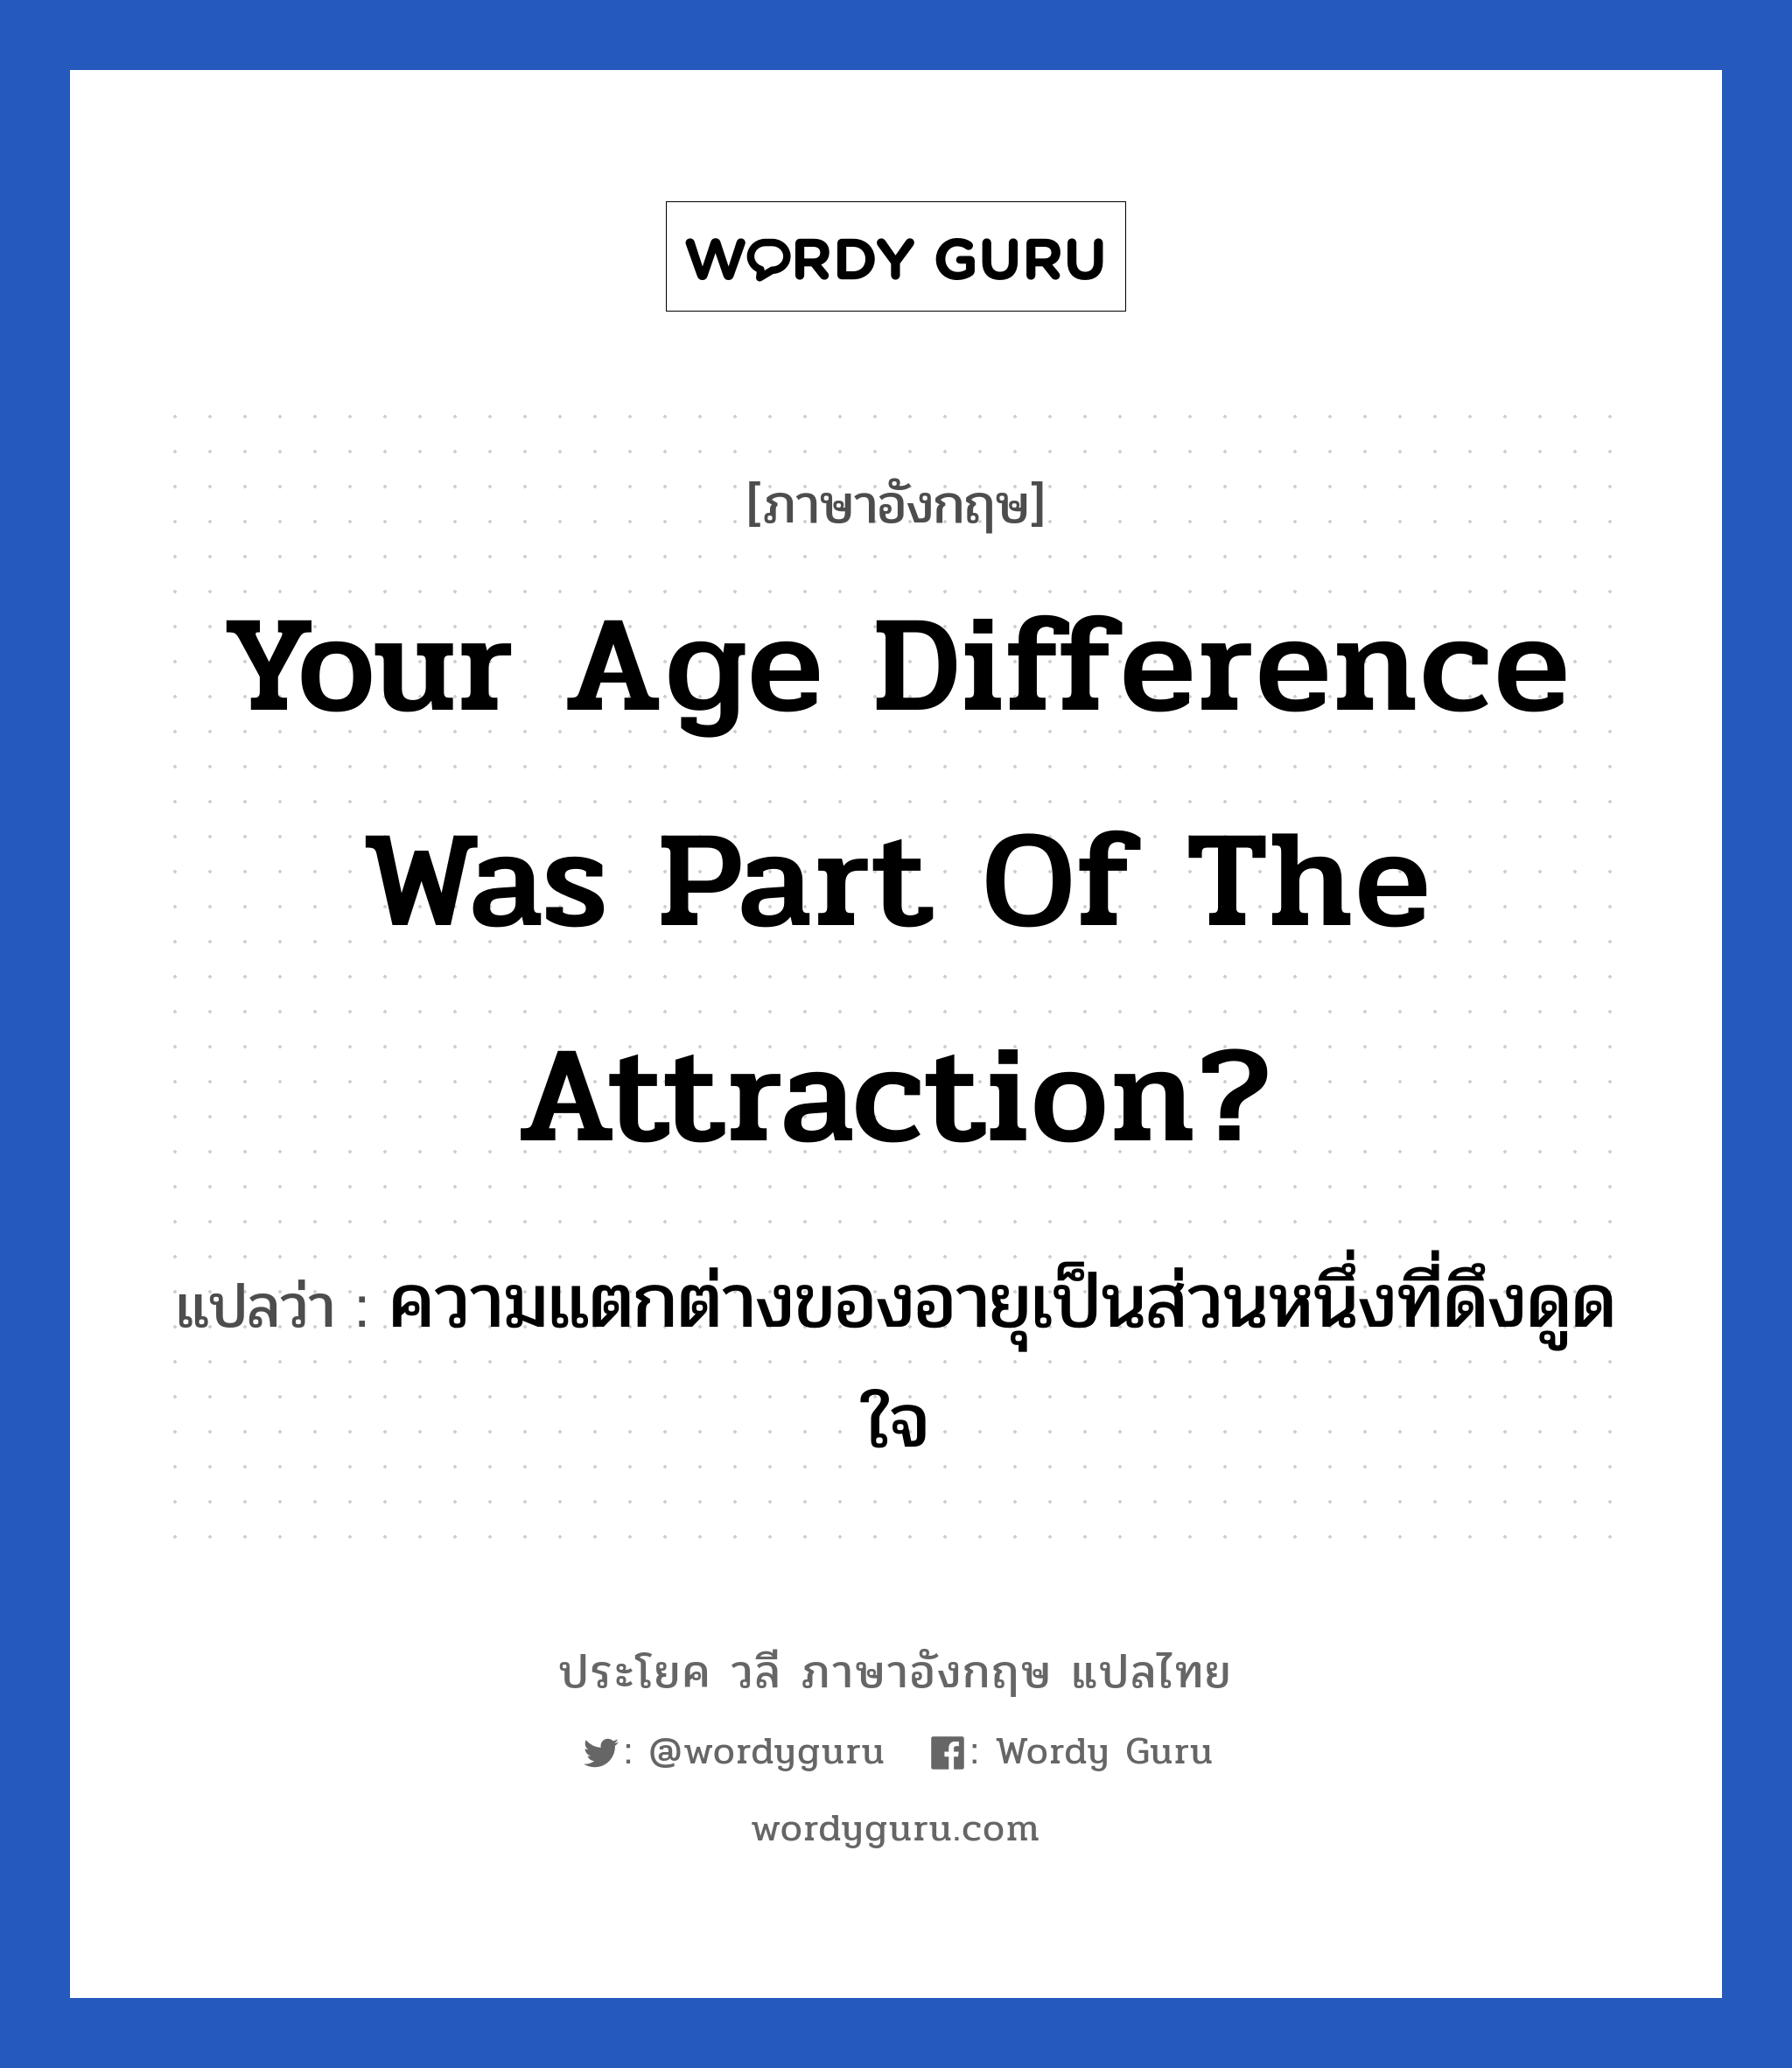 your age difference was part of the attraction? แปลว่า?, วลีภาษาอังกฤษ your age difference was part of the attraction? แปลว่า ความแตกต่างของอายุเป็นส่วนหนึ่งที่ดึงดูดใจ